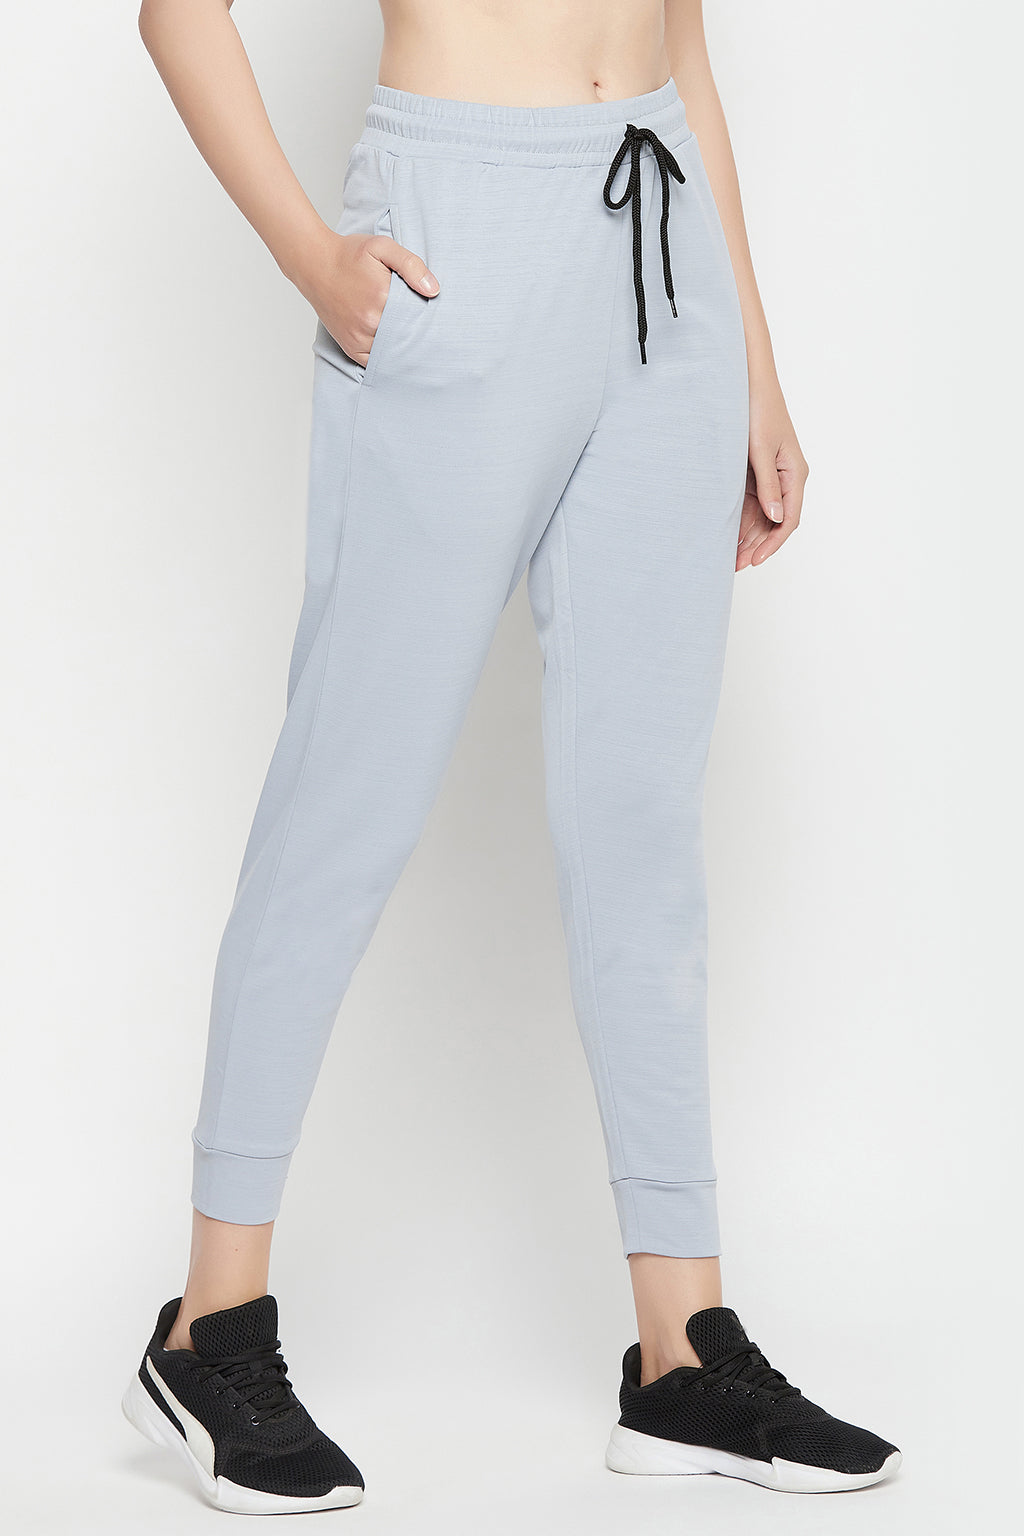 Buy White Track Pants for Women by Clovia Online